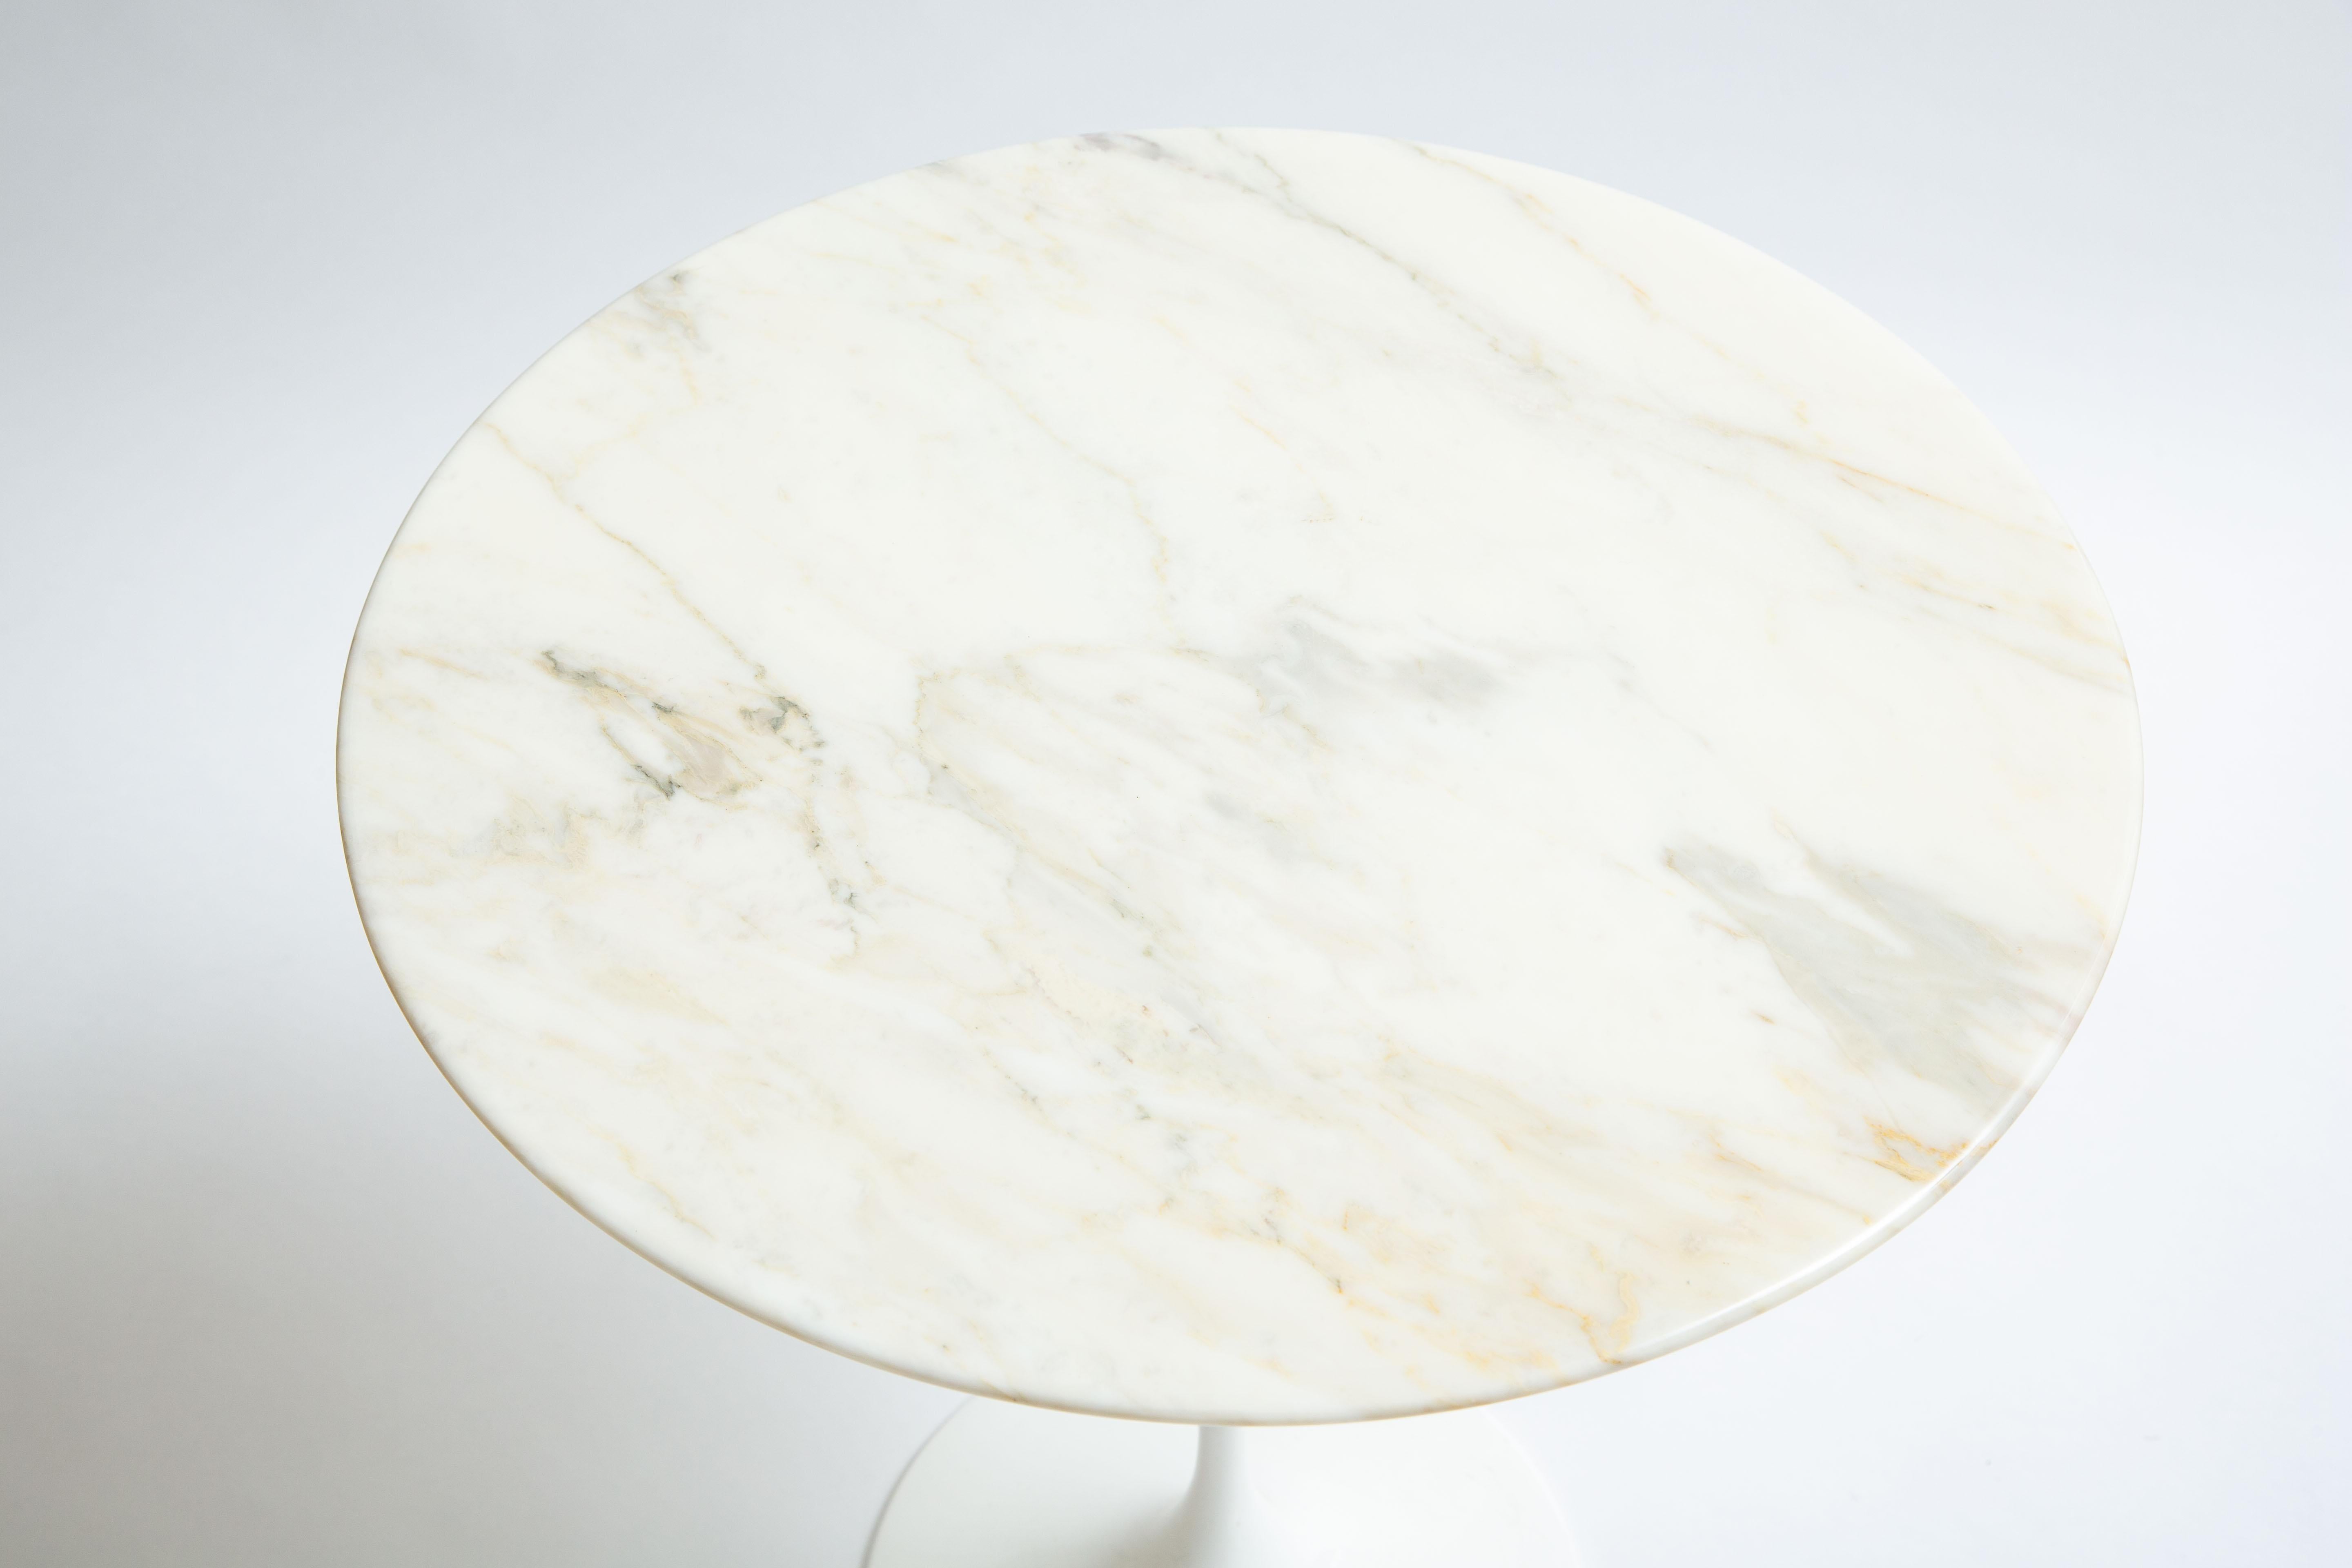 A classic table exhibiting the larger sized marble top.